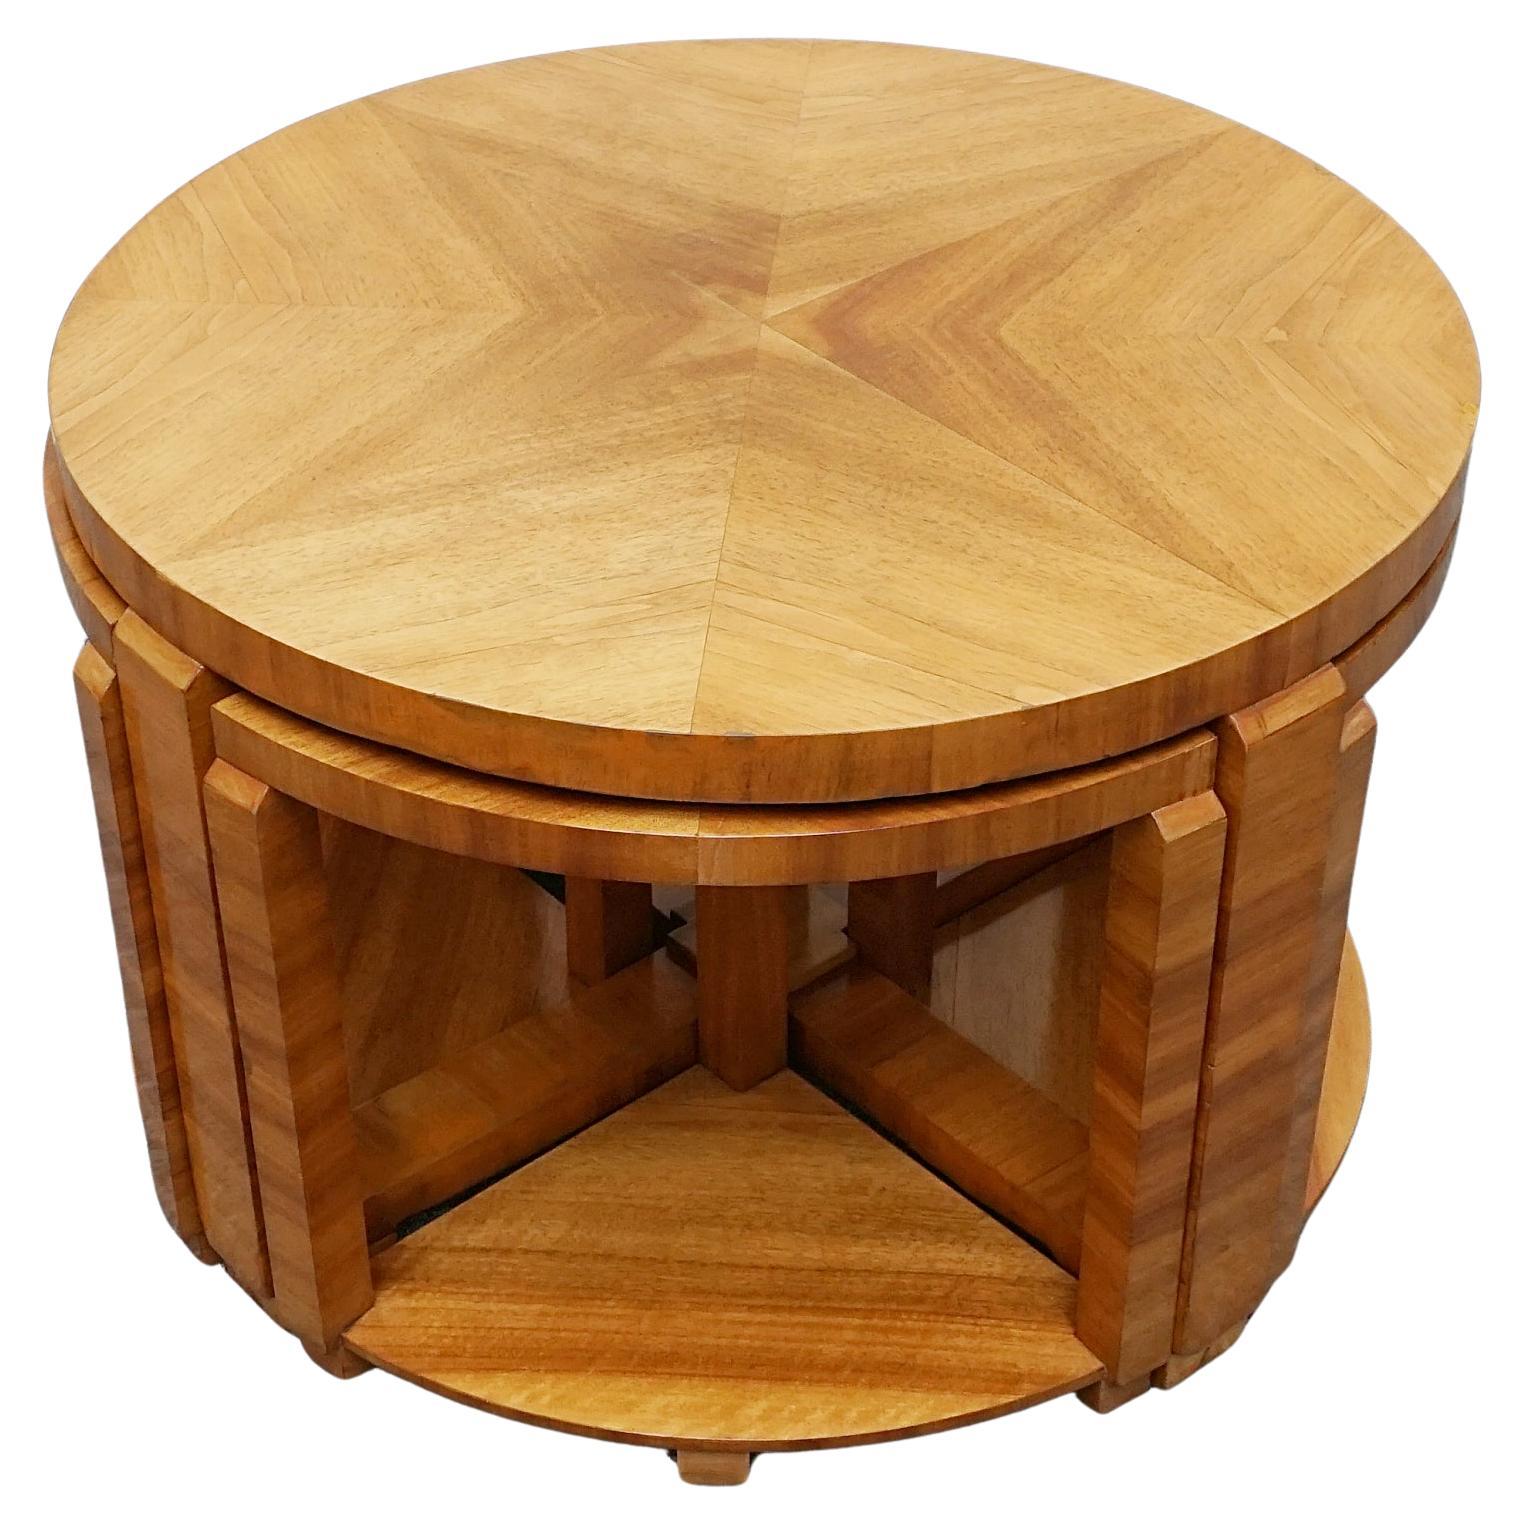 1930's English Art Deco Walnut Nest of Tables  For Sale